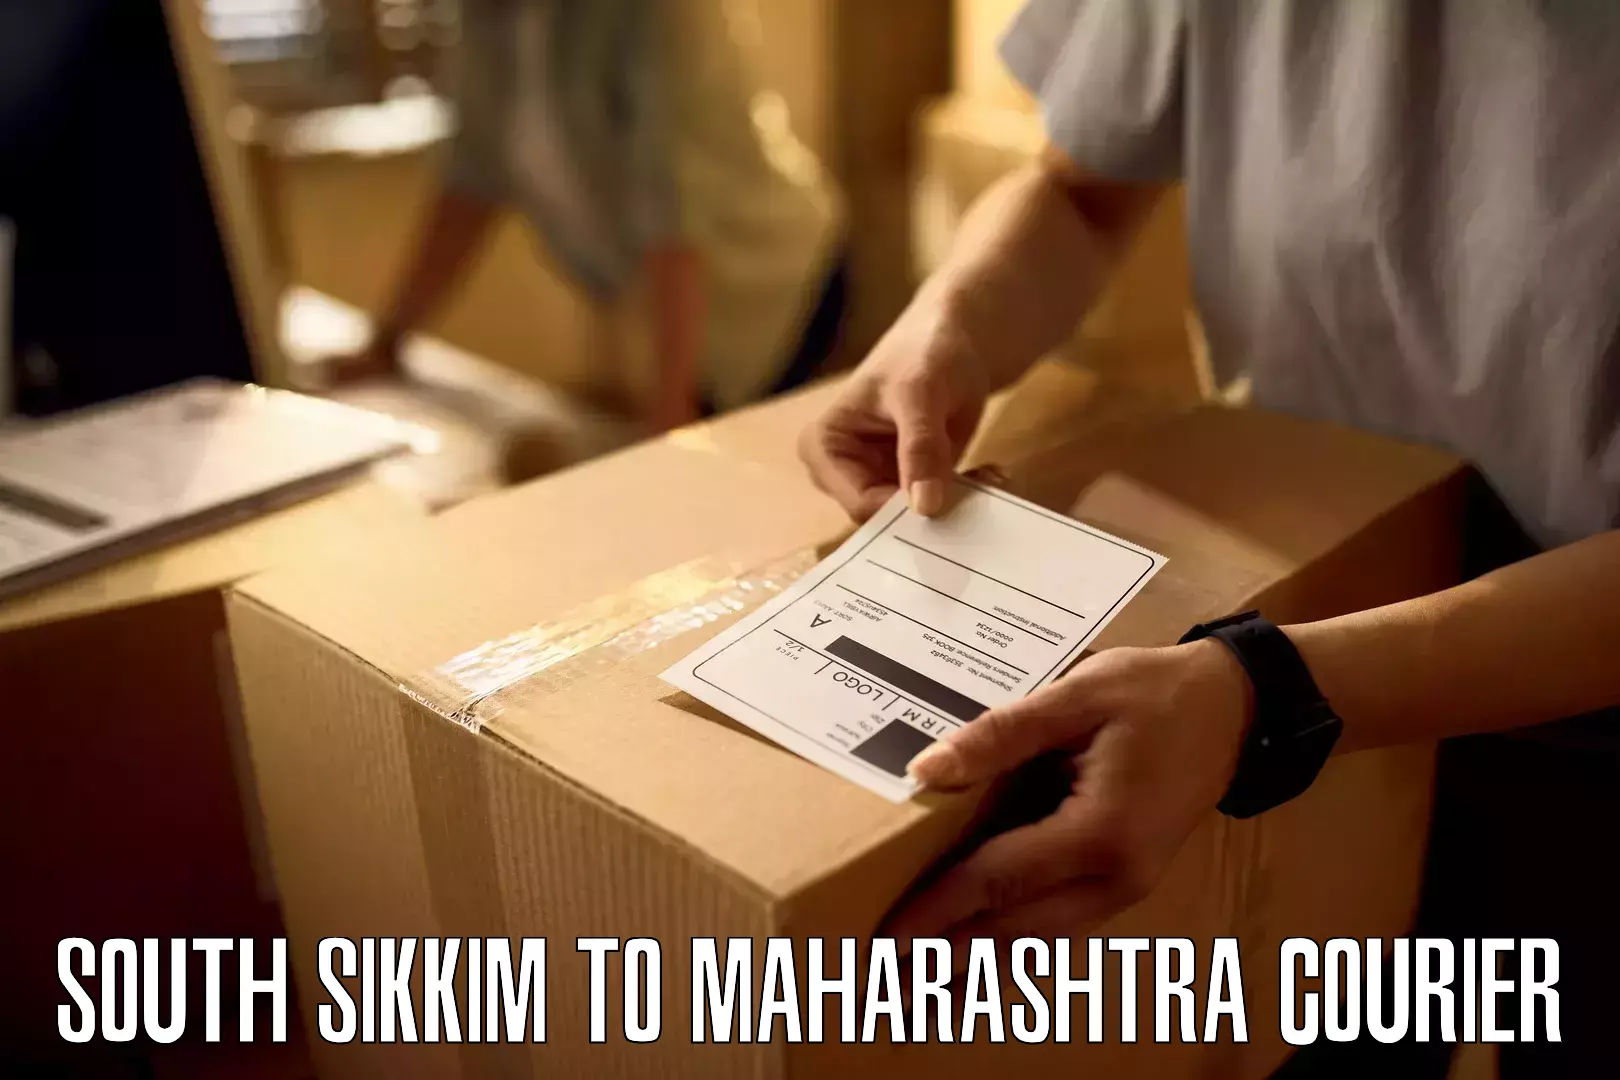 Bulk courier orders in South Sikkim to Bhiwandi